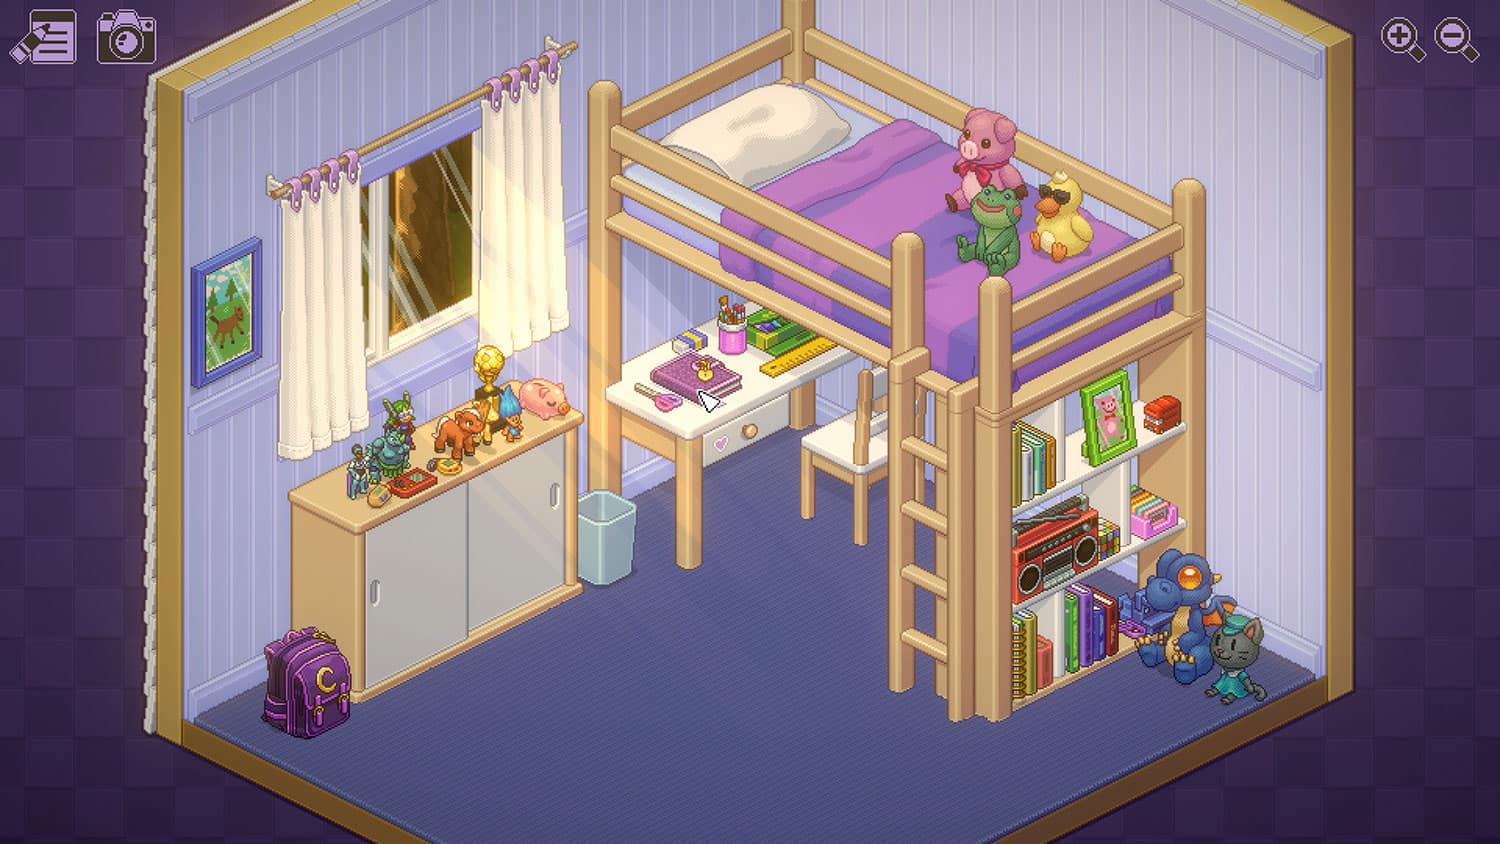 Childs room in the game unpacking with a bunk bed and light streaming through the window